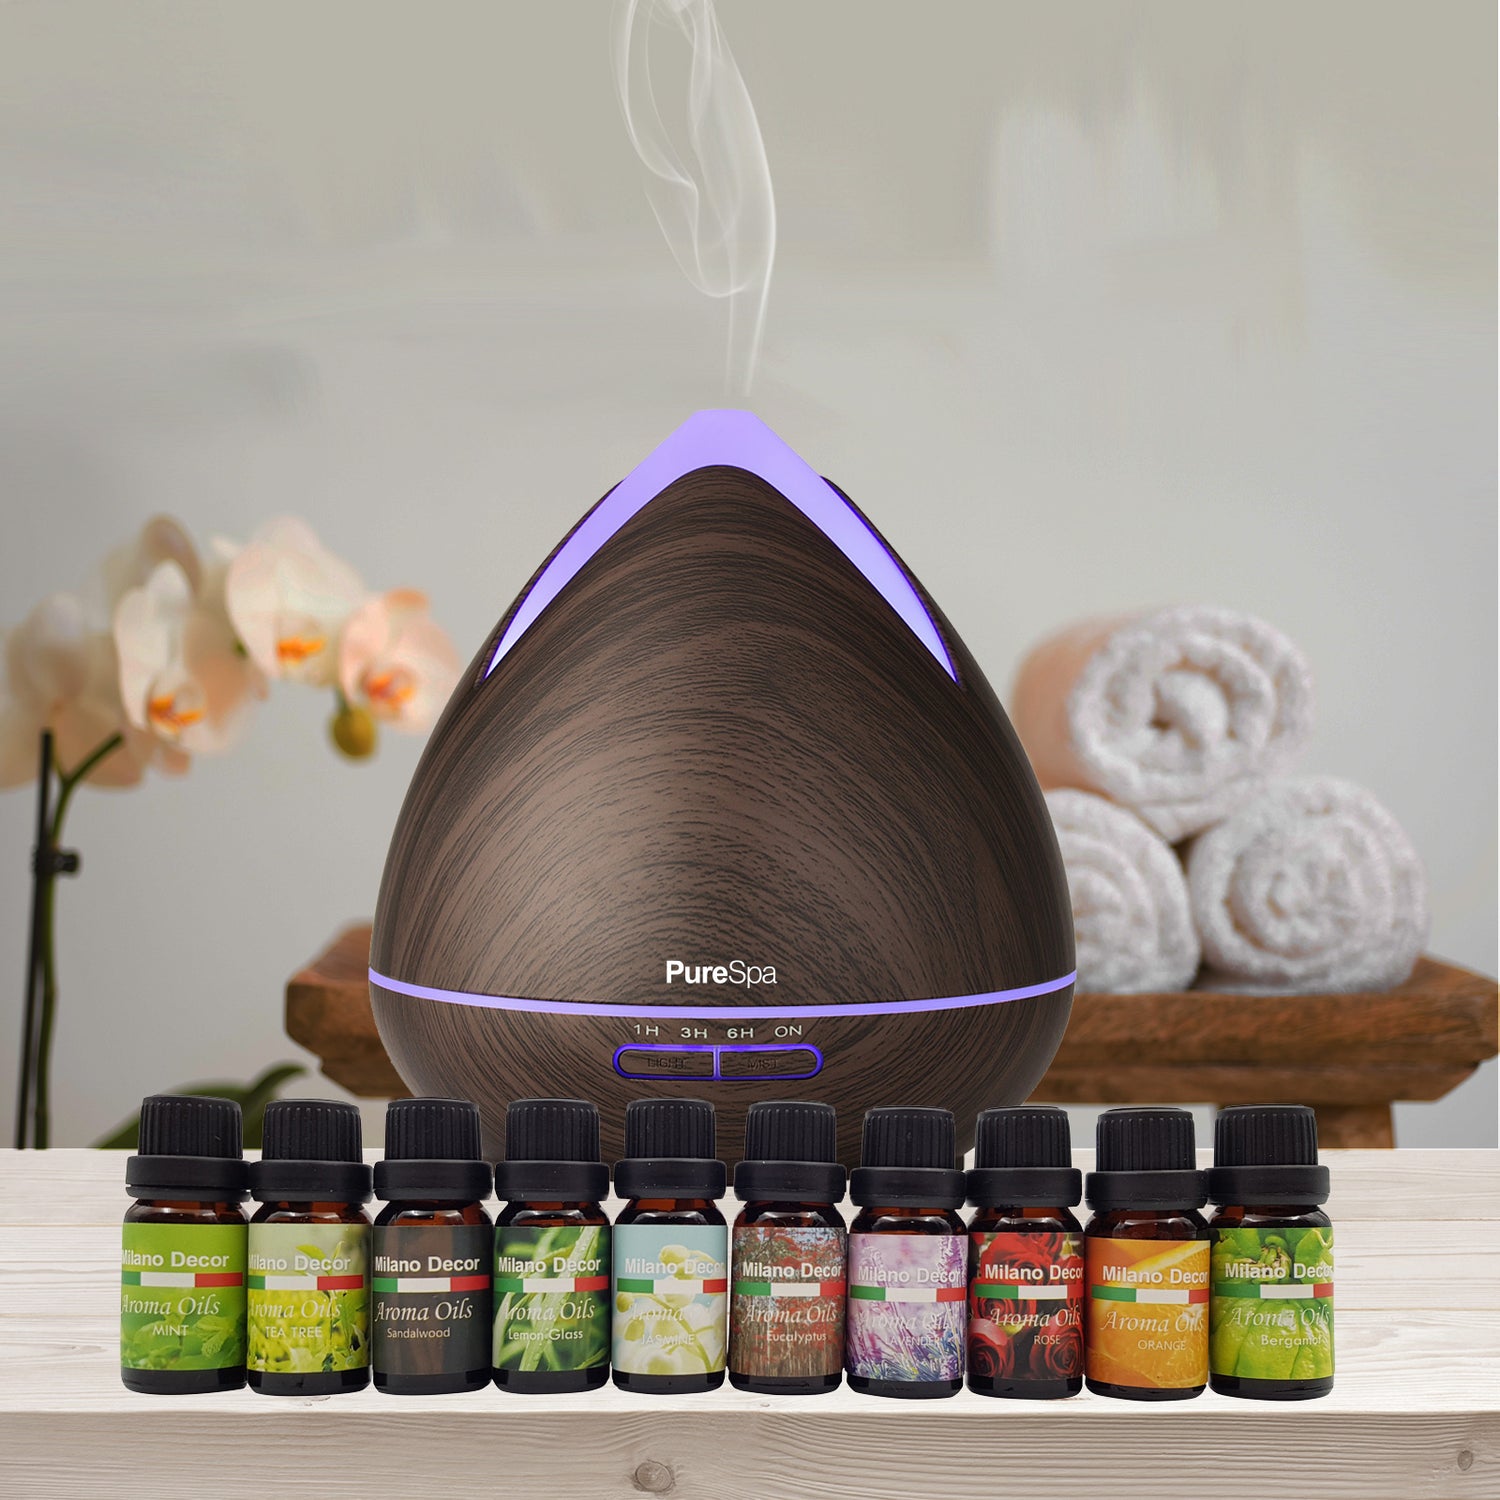 Purespa Diffuser Set With 10 Pack Diffuser Oils Humidifier Aromatherapy-Home Fragrances-PEROZ Accessories